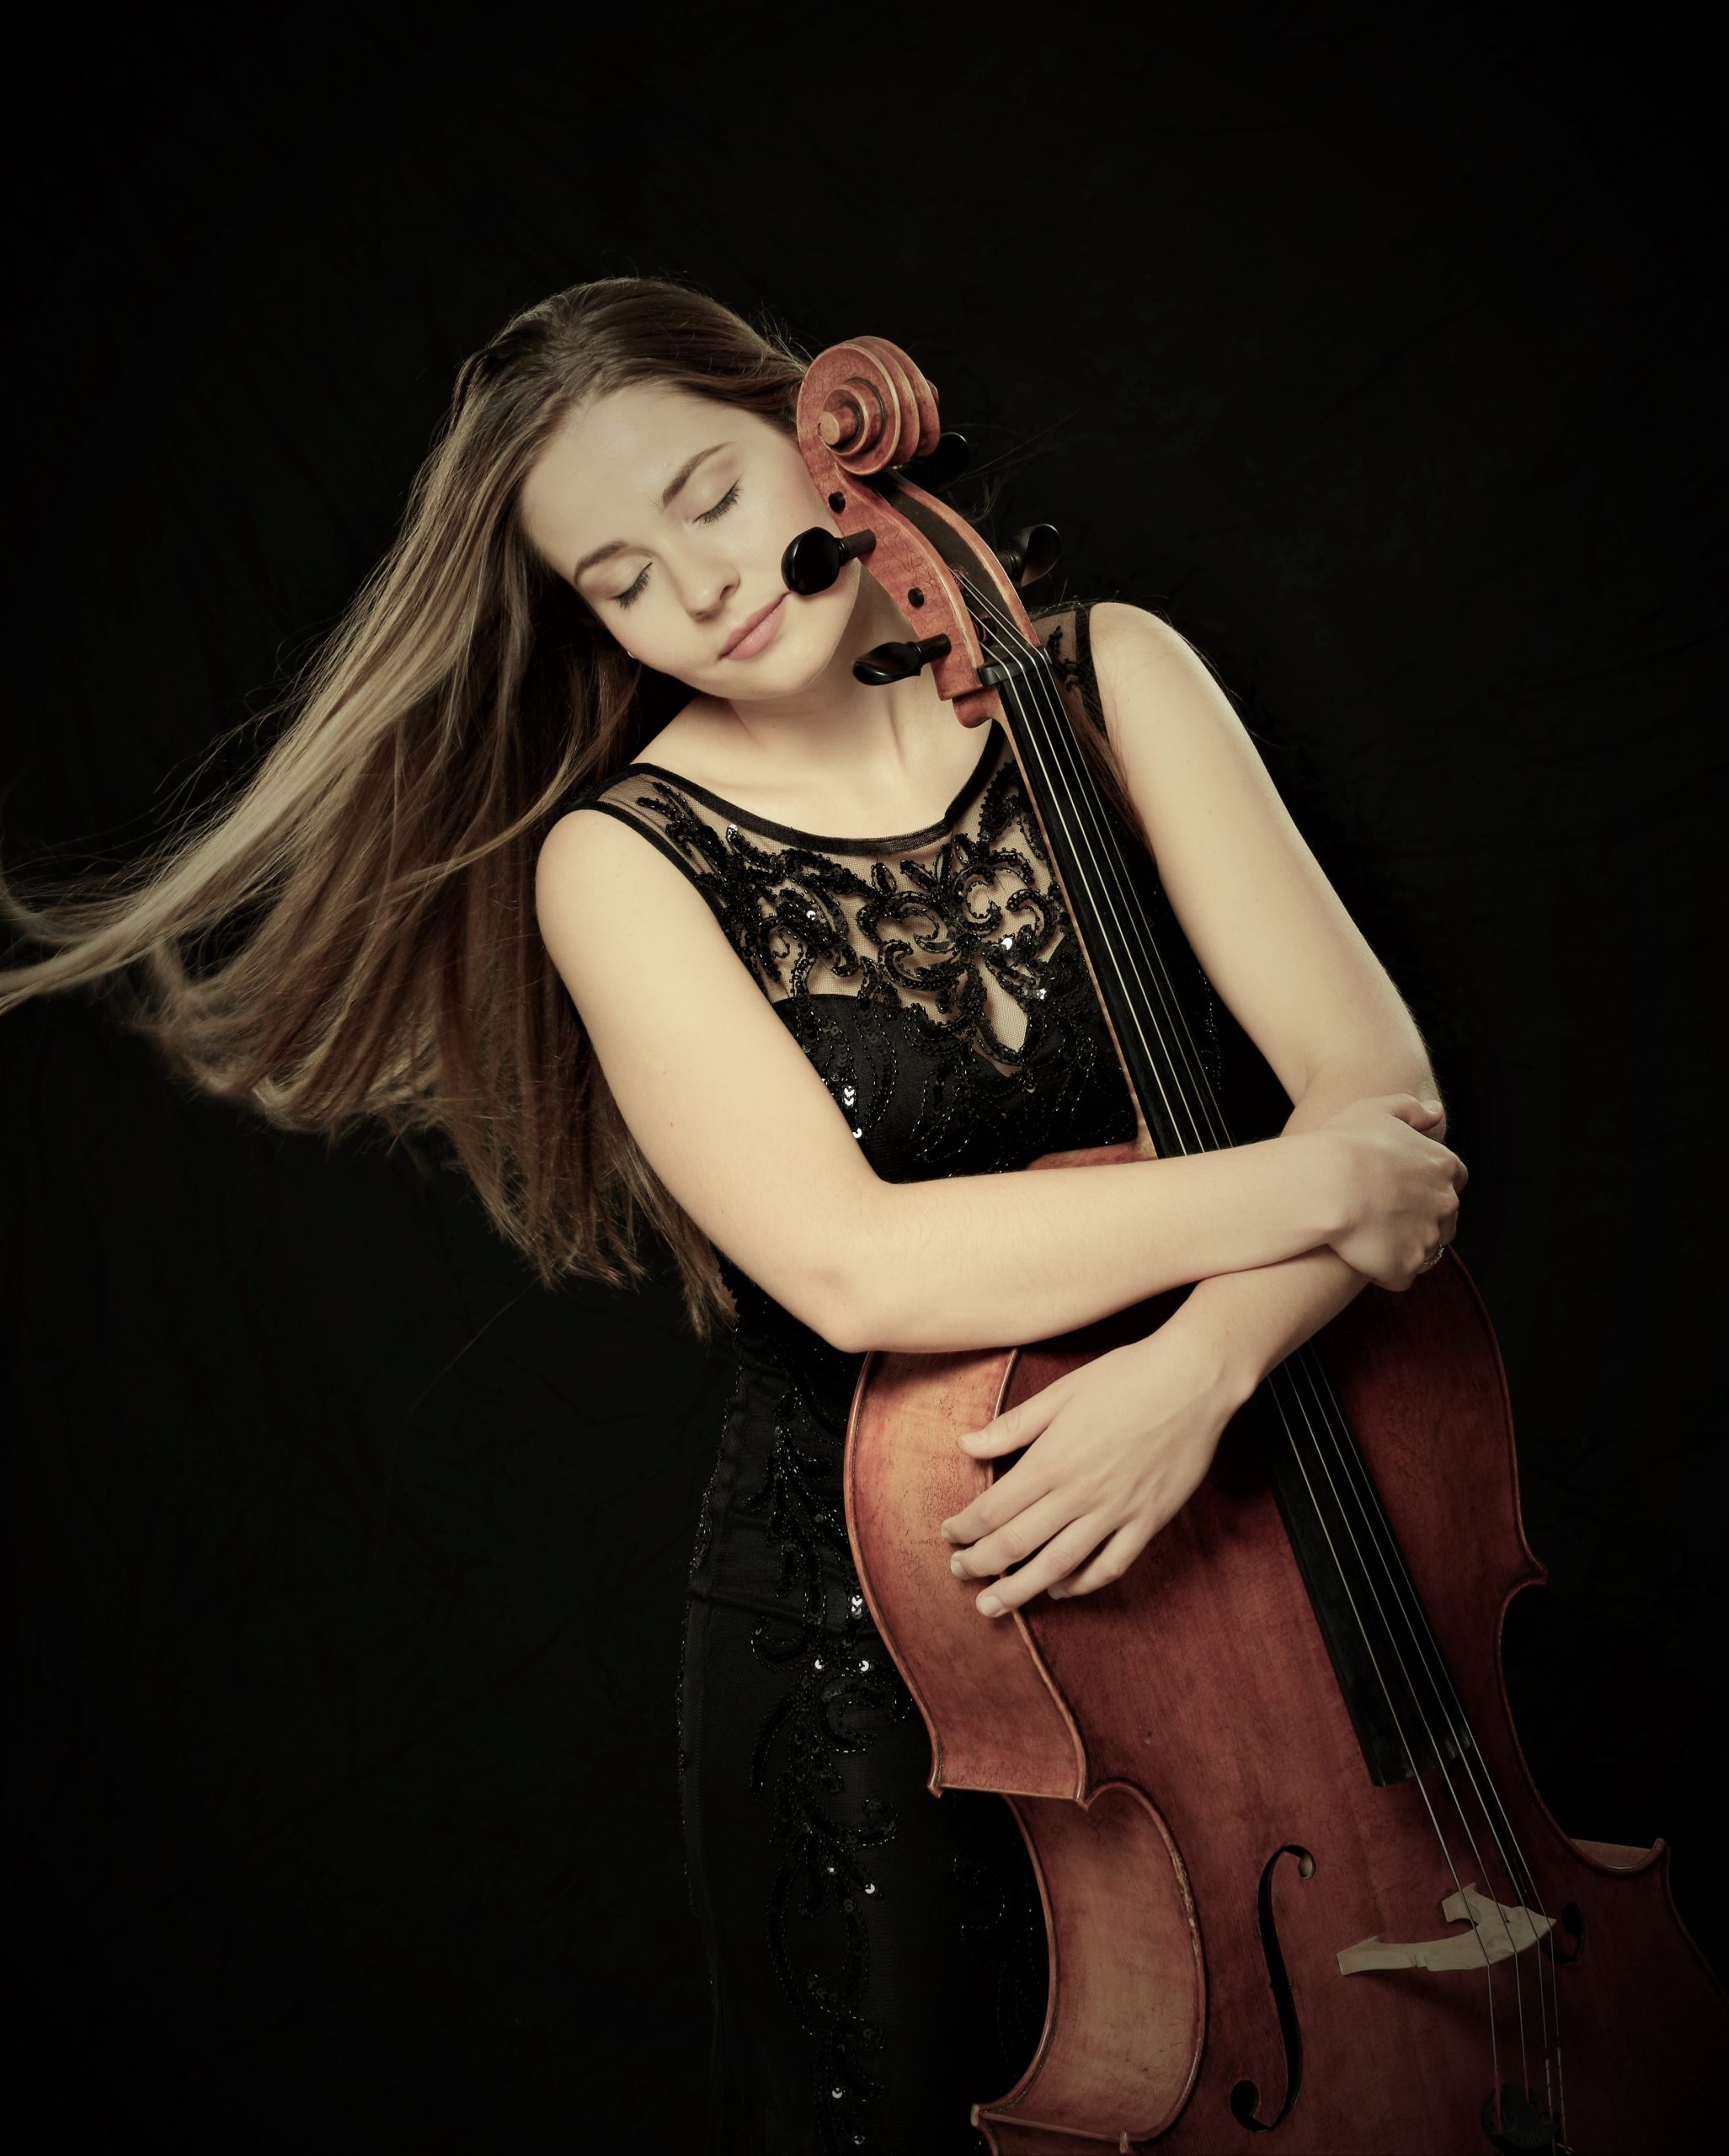 Violoncello: A Bowed String Instrument Of The Violin Family, Symphony Orchestra, Cellist. 2060x2560 HD Wallpaper.